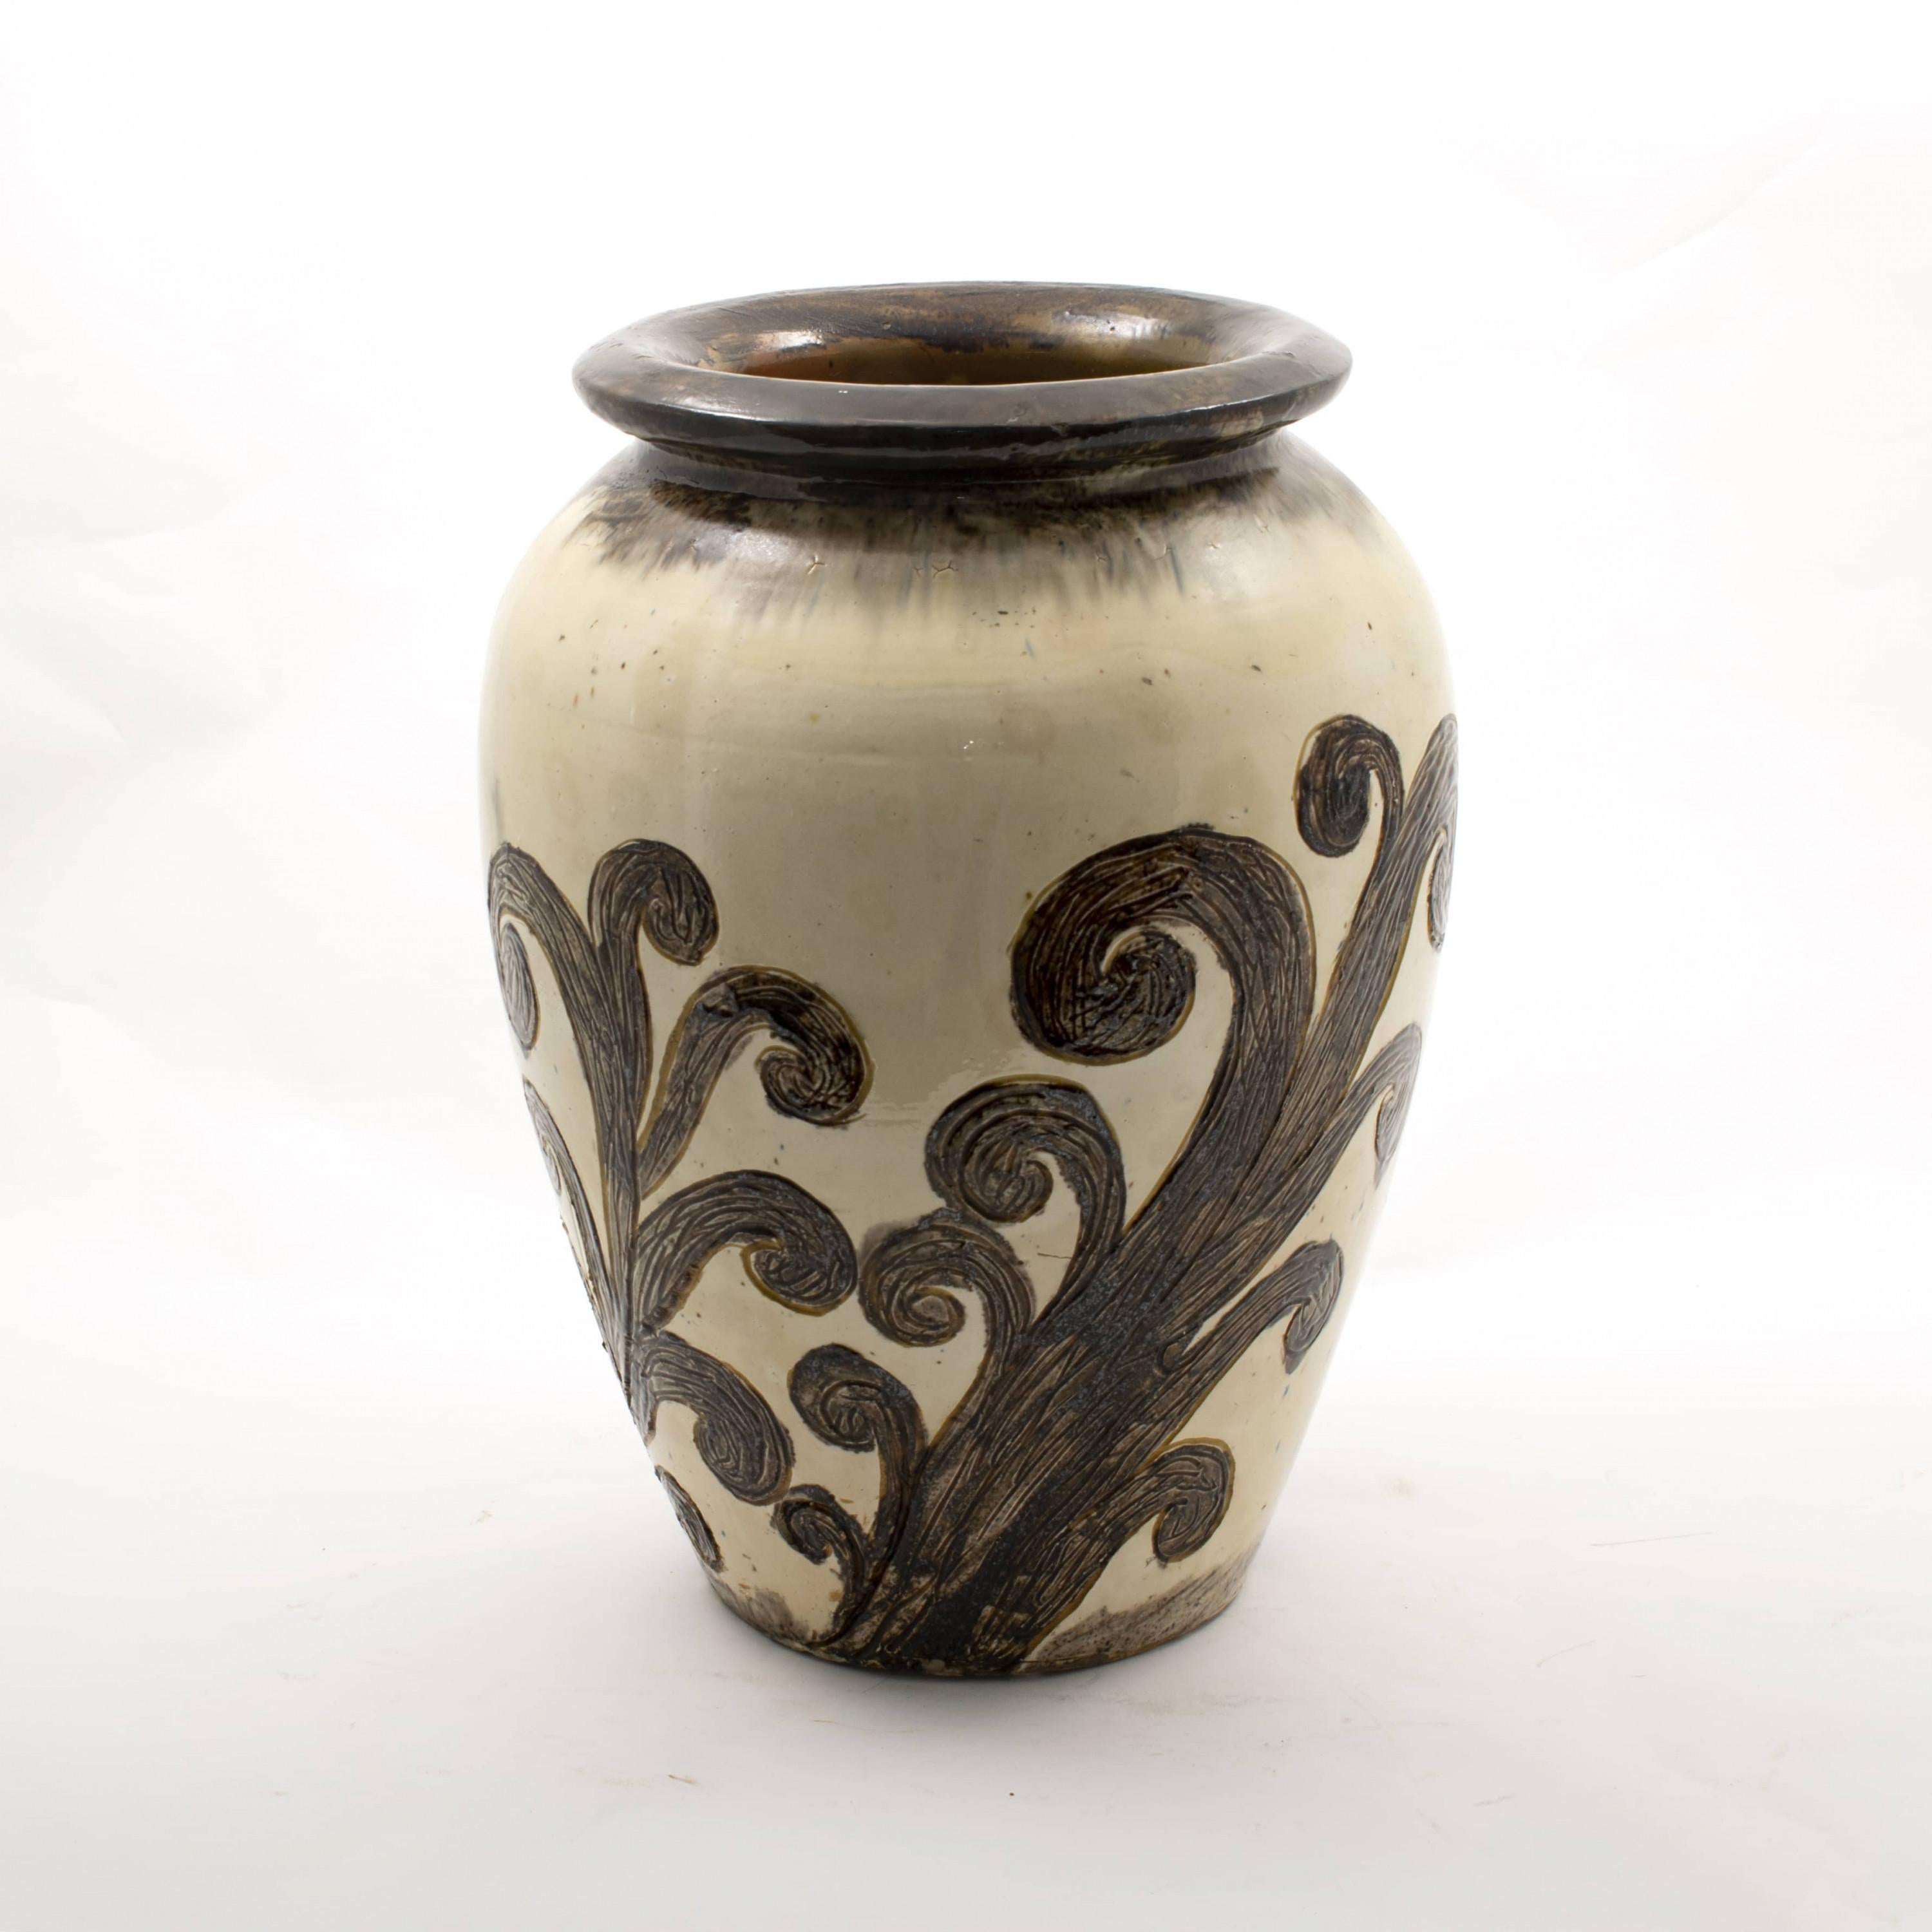 Art Nouveau Thorvald Bindesbøll, Large One of a Kind Ceramic Vase with Organic Motifs For Sale